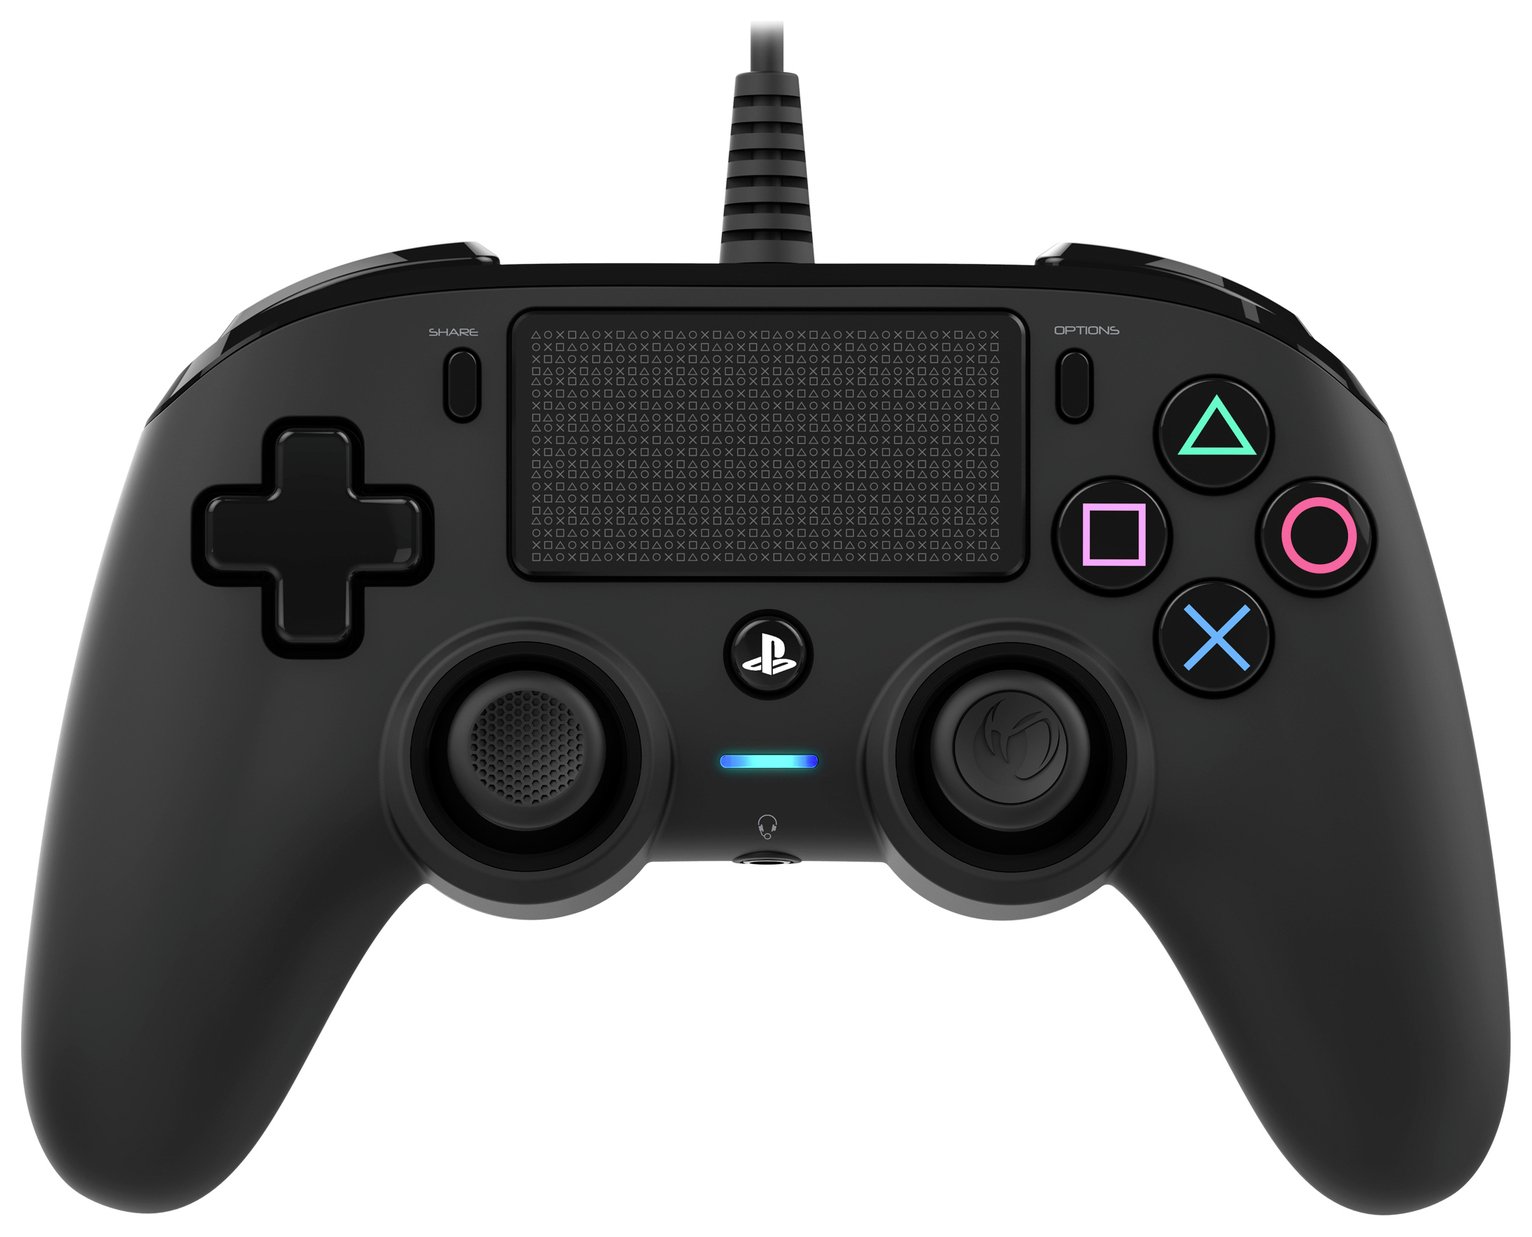 Nacon Official PS4 Wired Controller - Black